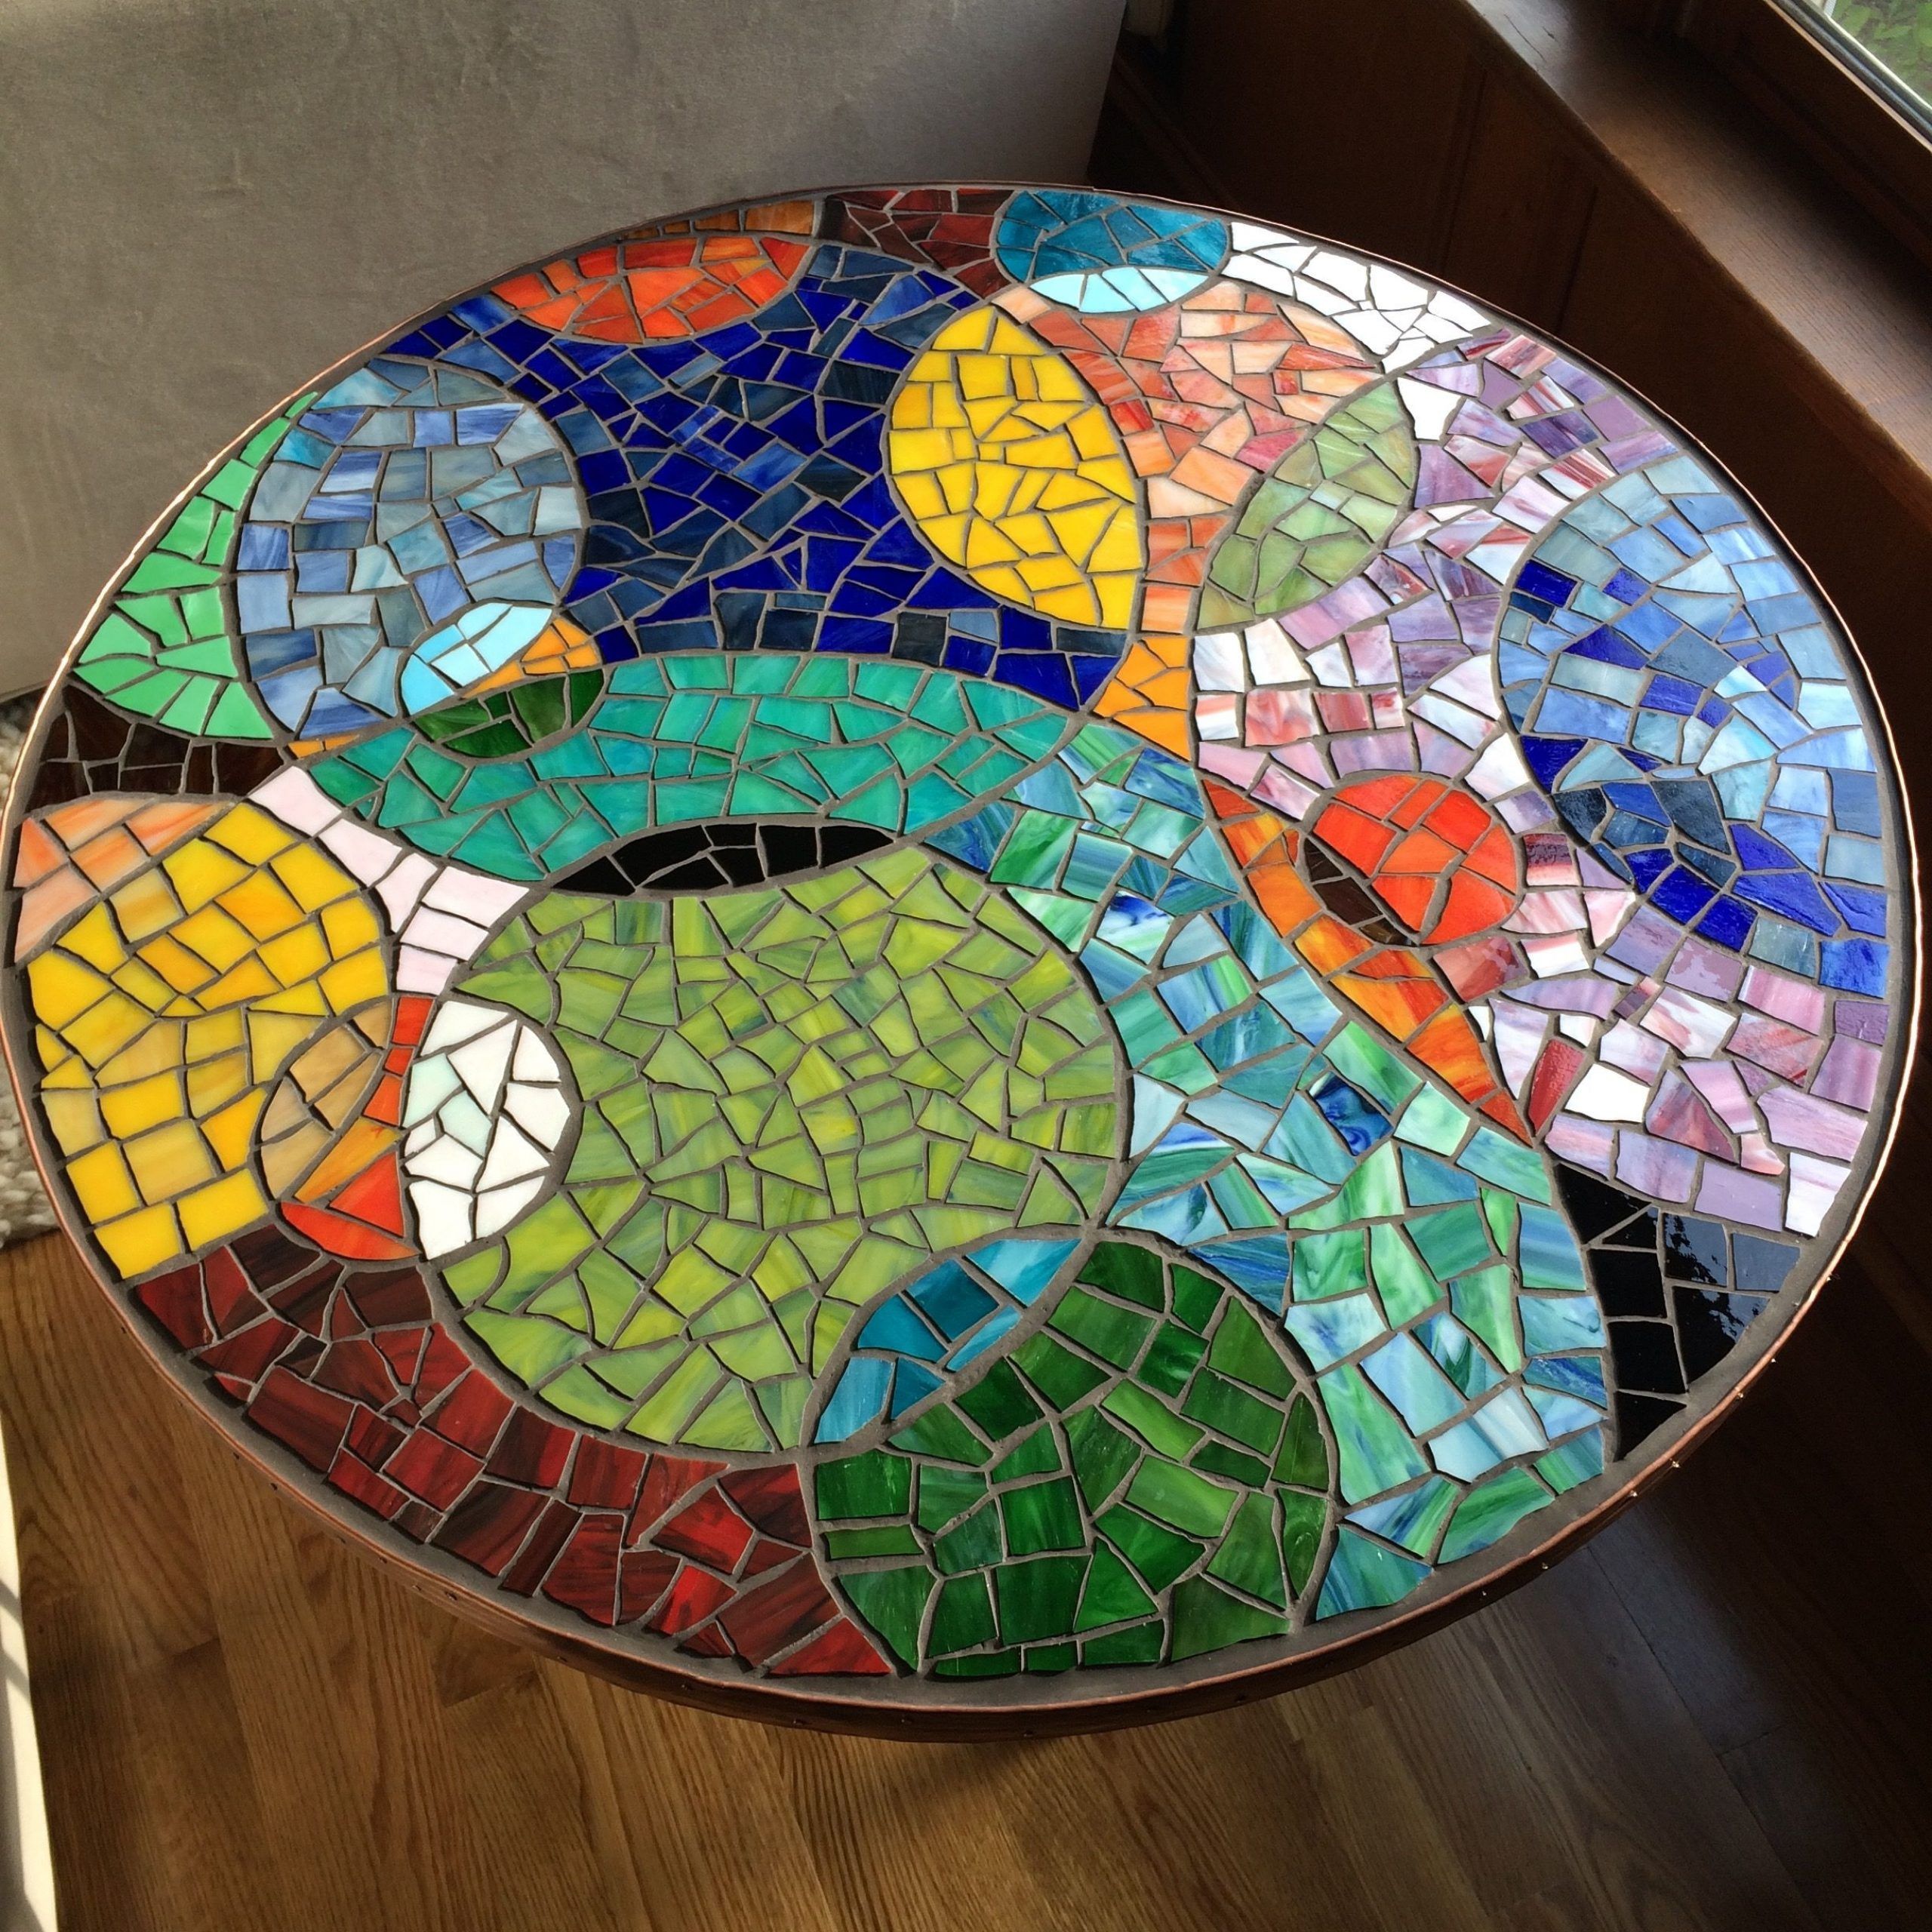 Round Mosaic End Table #Mosaic2015 #Mosaicendtable #Mosaicdiy | Mosaic With Mosaic Tile Top Round Side Tables (View 11 of 15)